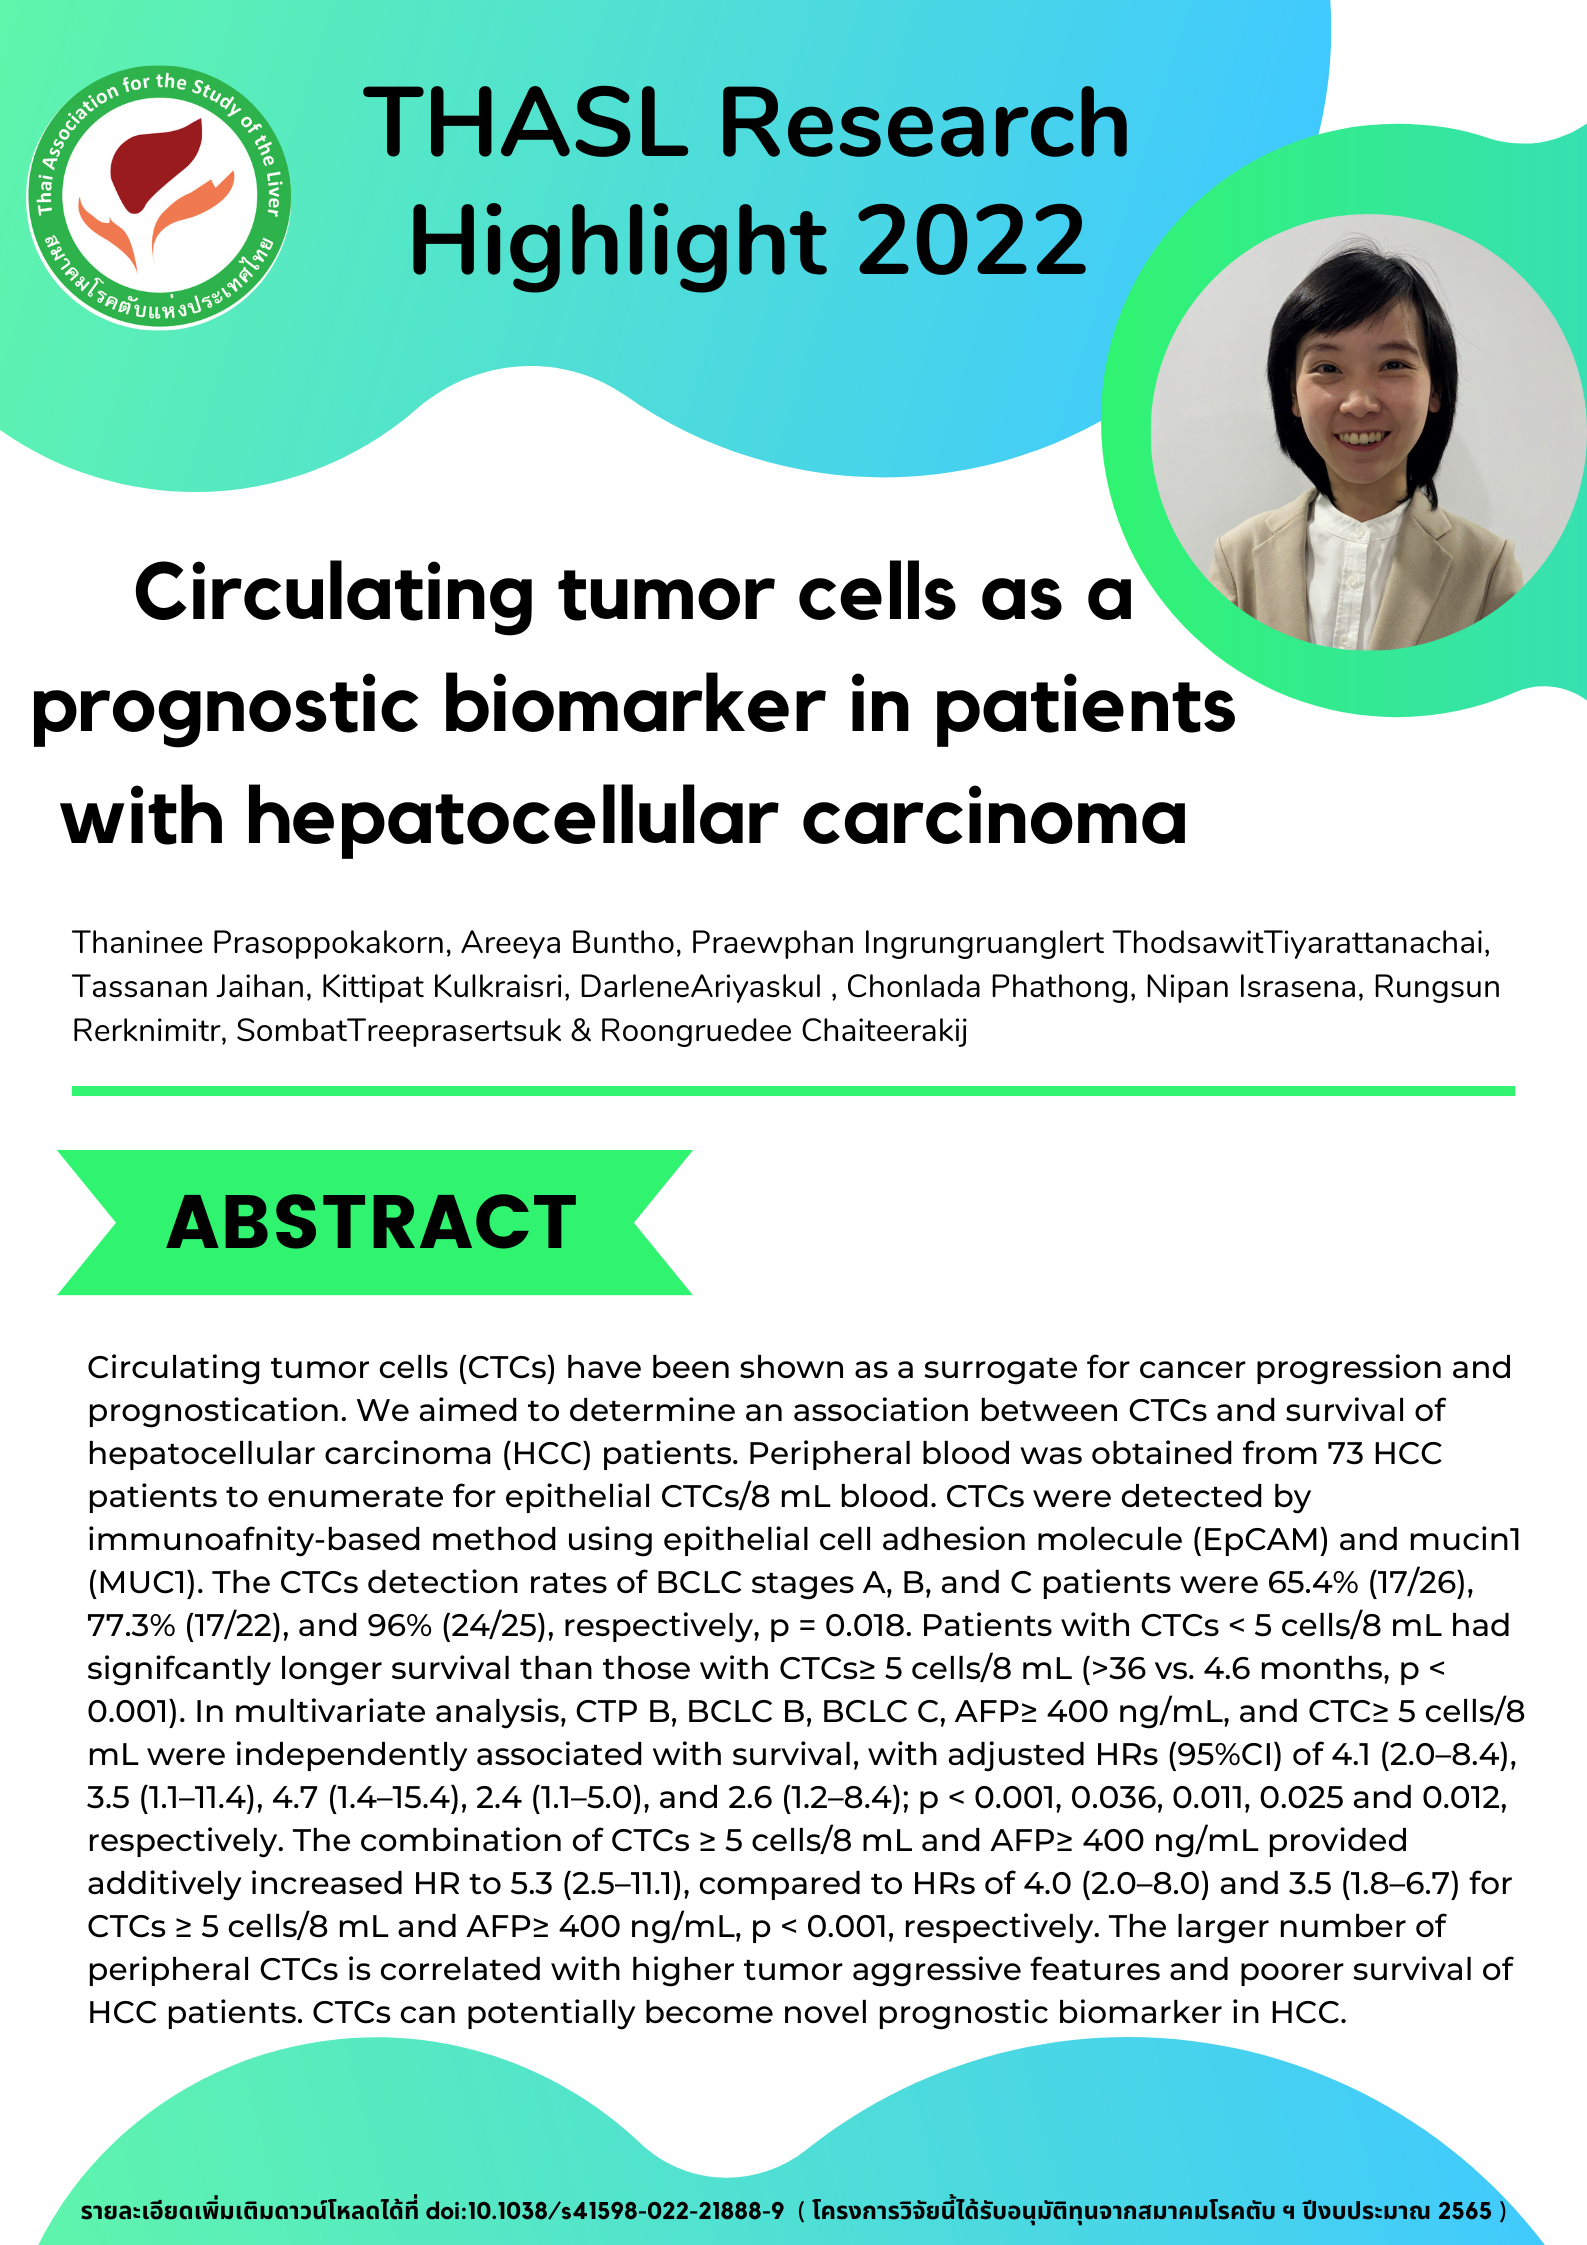 Circulating tumor cells as a prognostic biomarker in patients with hepatocellular carcinoma